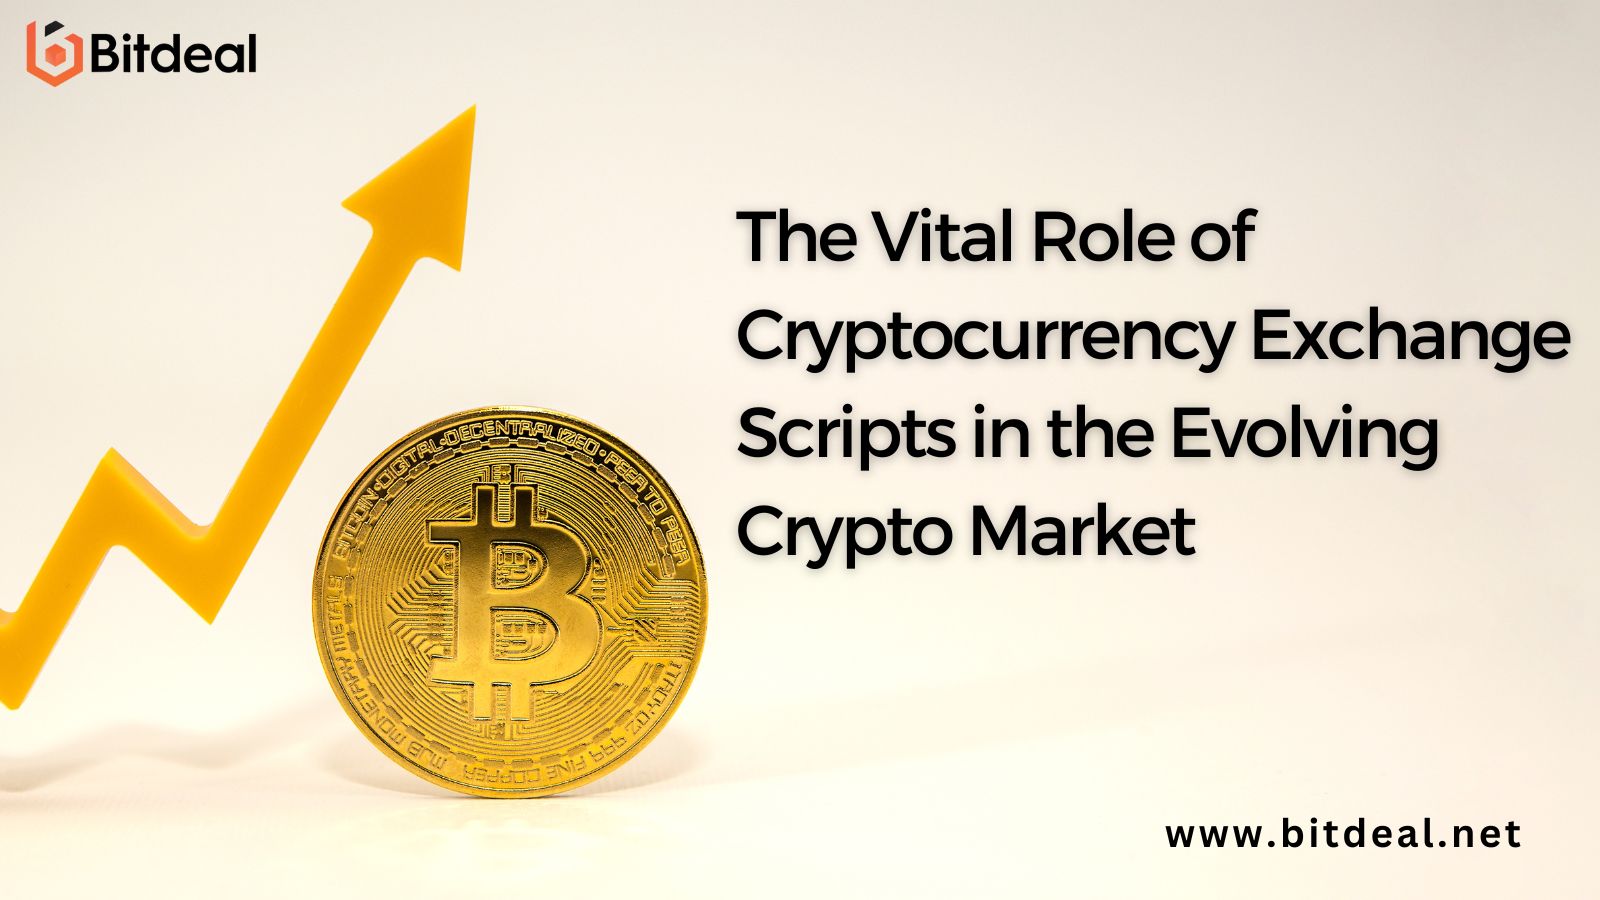 The Vital Role of Cryptocurrency Exchange Scripts in the Evolving Crypto Market